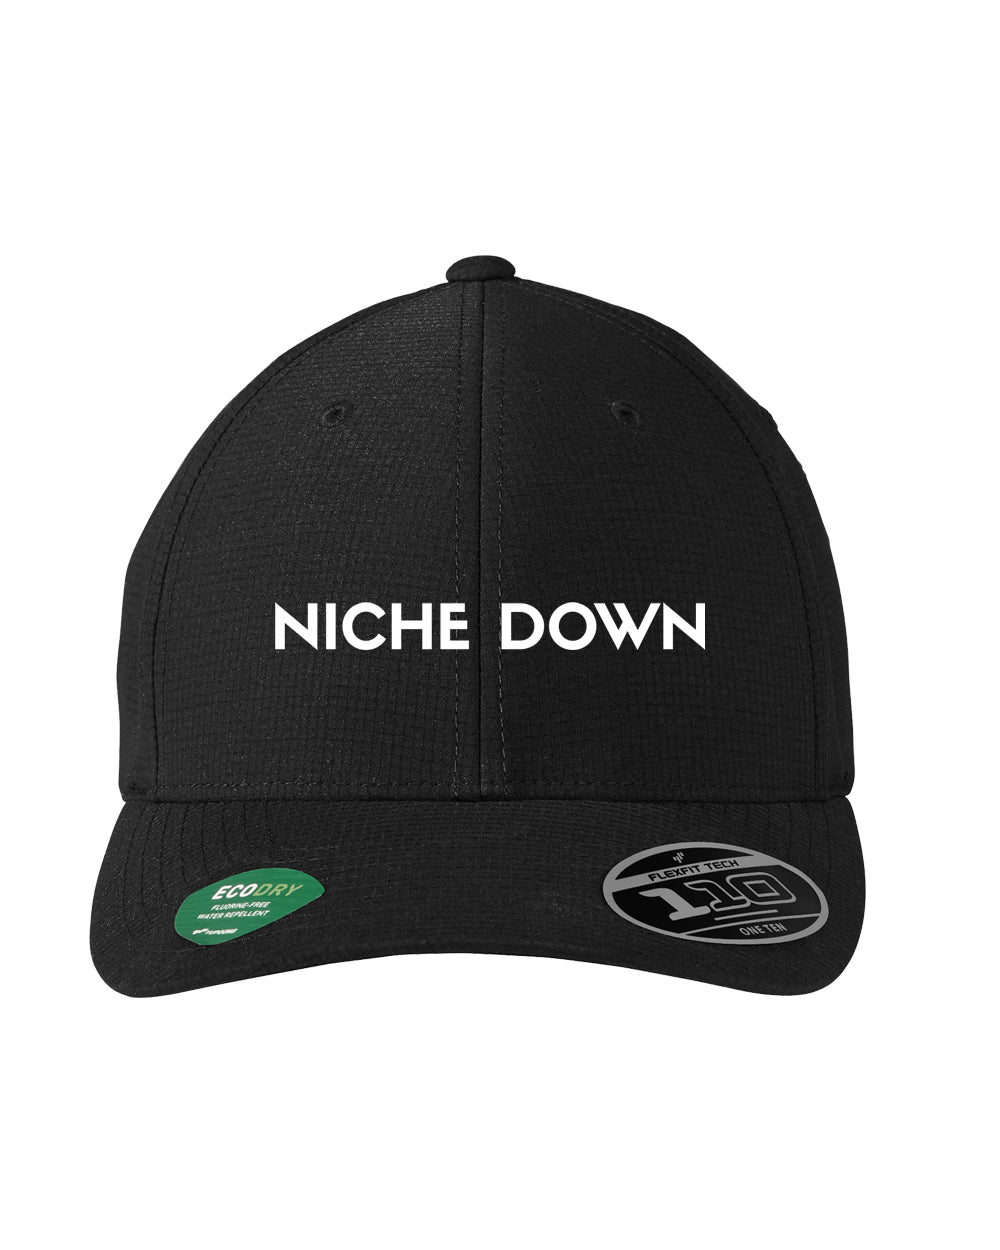 Freelance with Phil - Niche Down Snapback